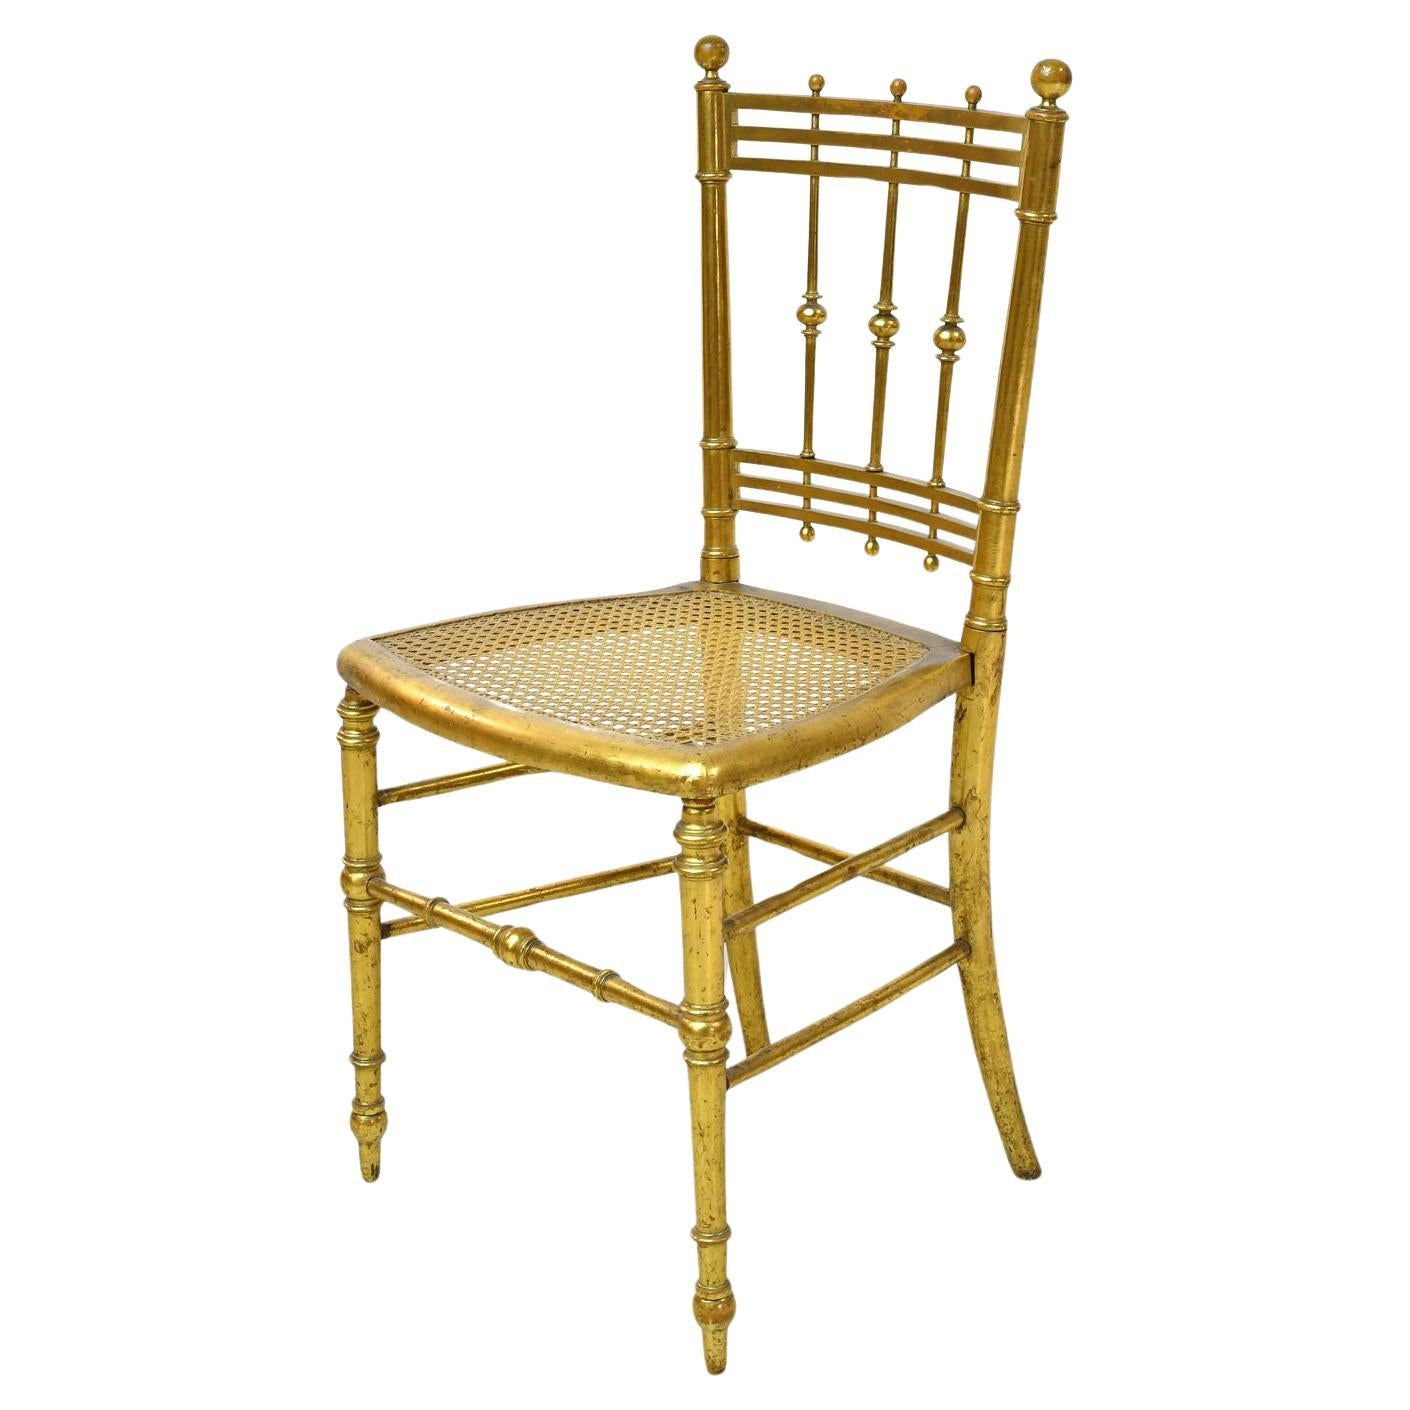 Early 20th Century French Belle Époque Chair in Gilt-Wood with Cane Seat. For Sale